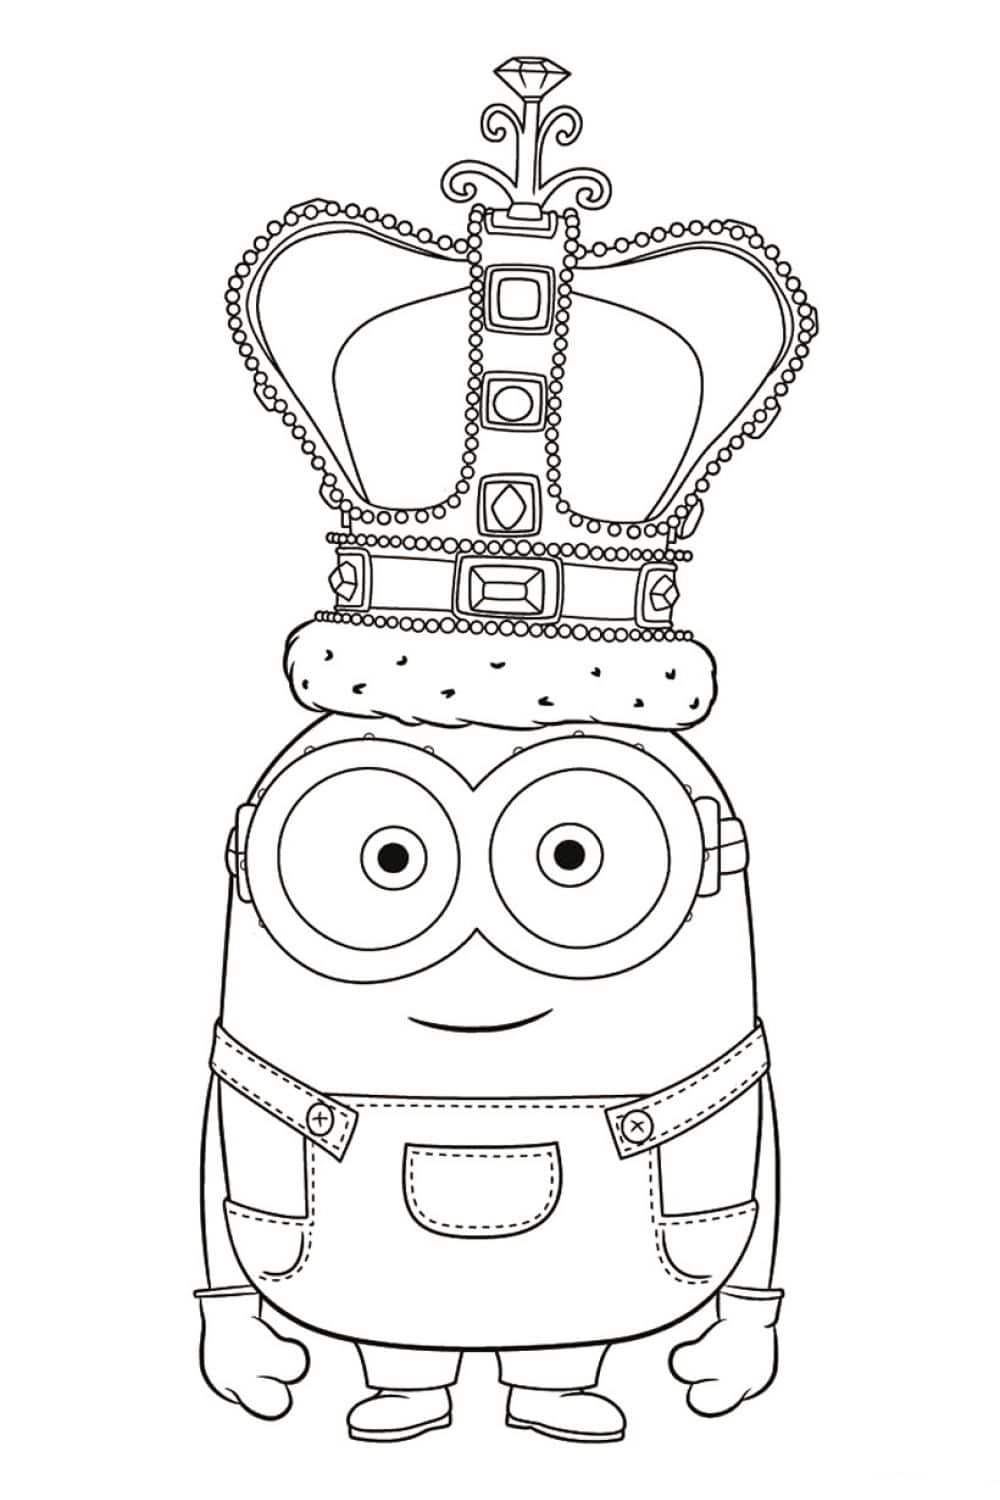 Minion with a big crown